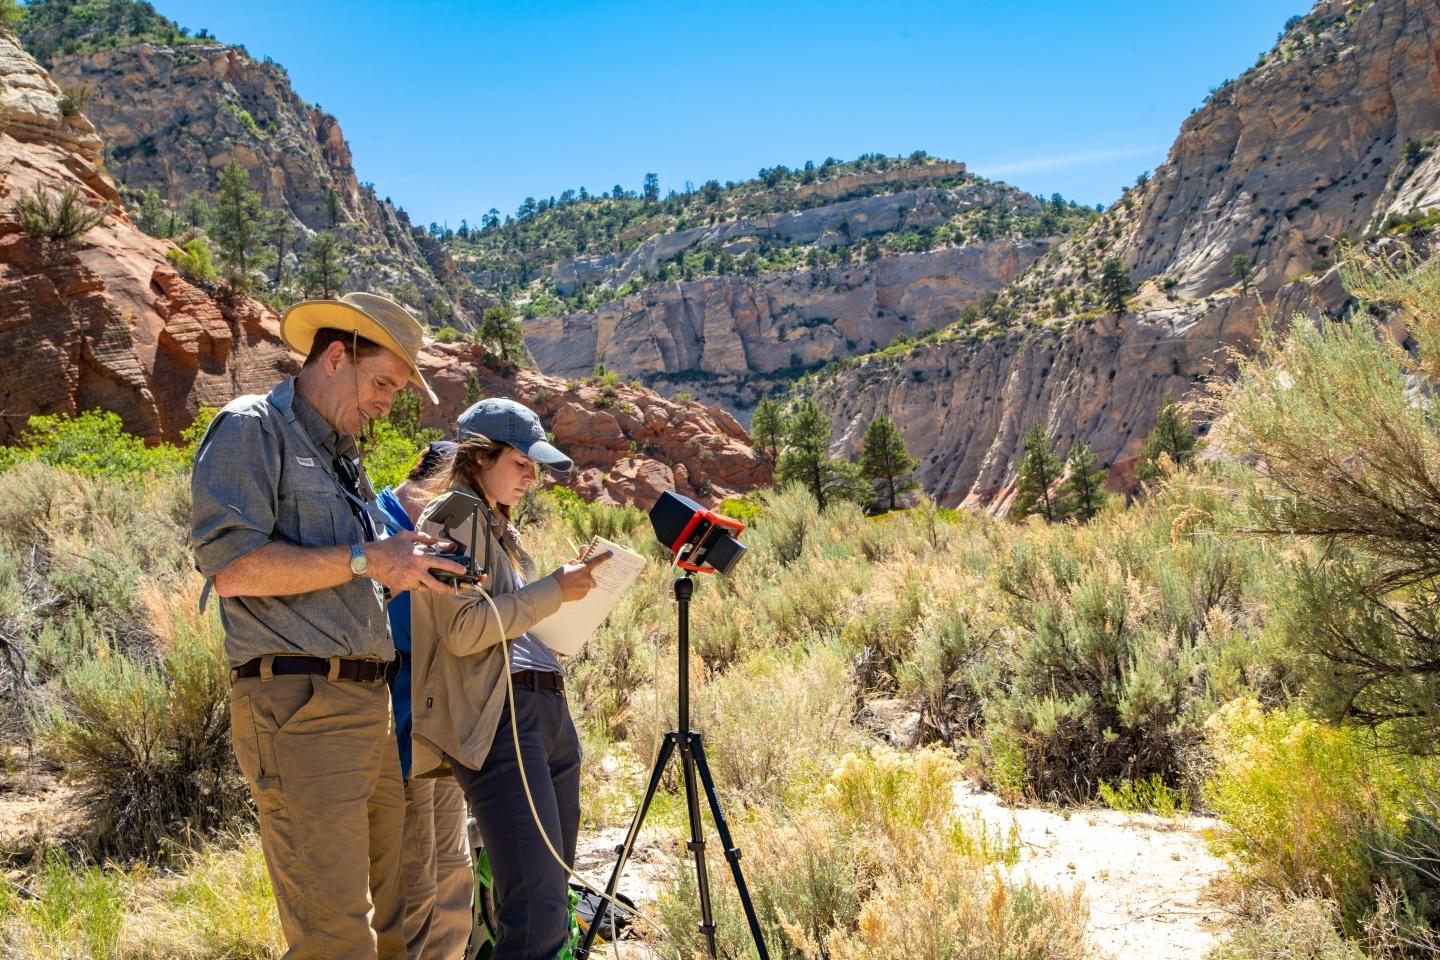 Professor and students taking measurements in canyon